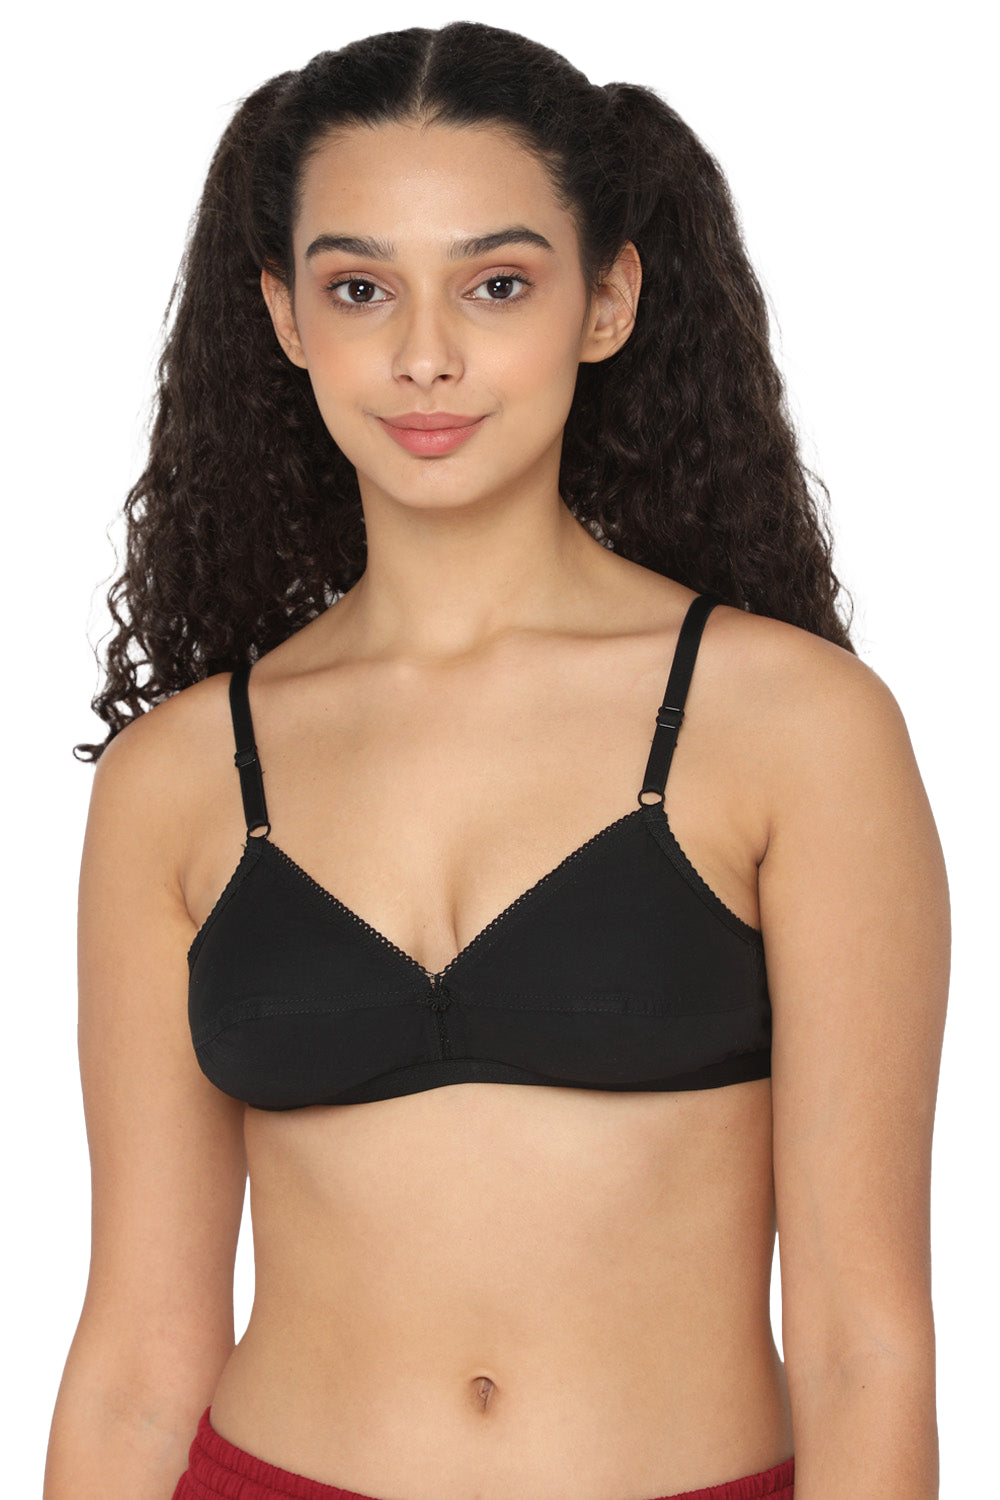 Naidu Hall Heritage-Bra Special Combo Pack - Trend - C63